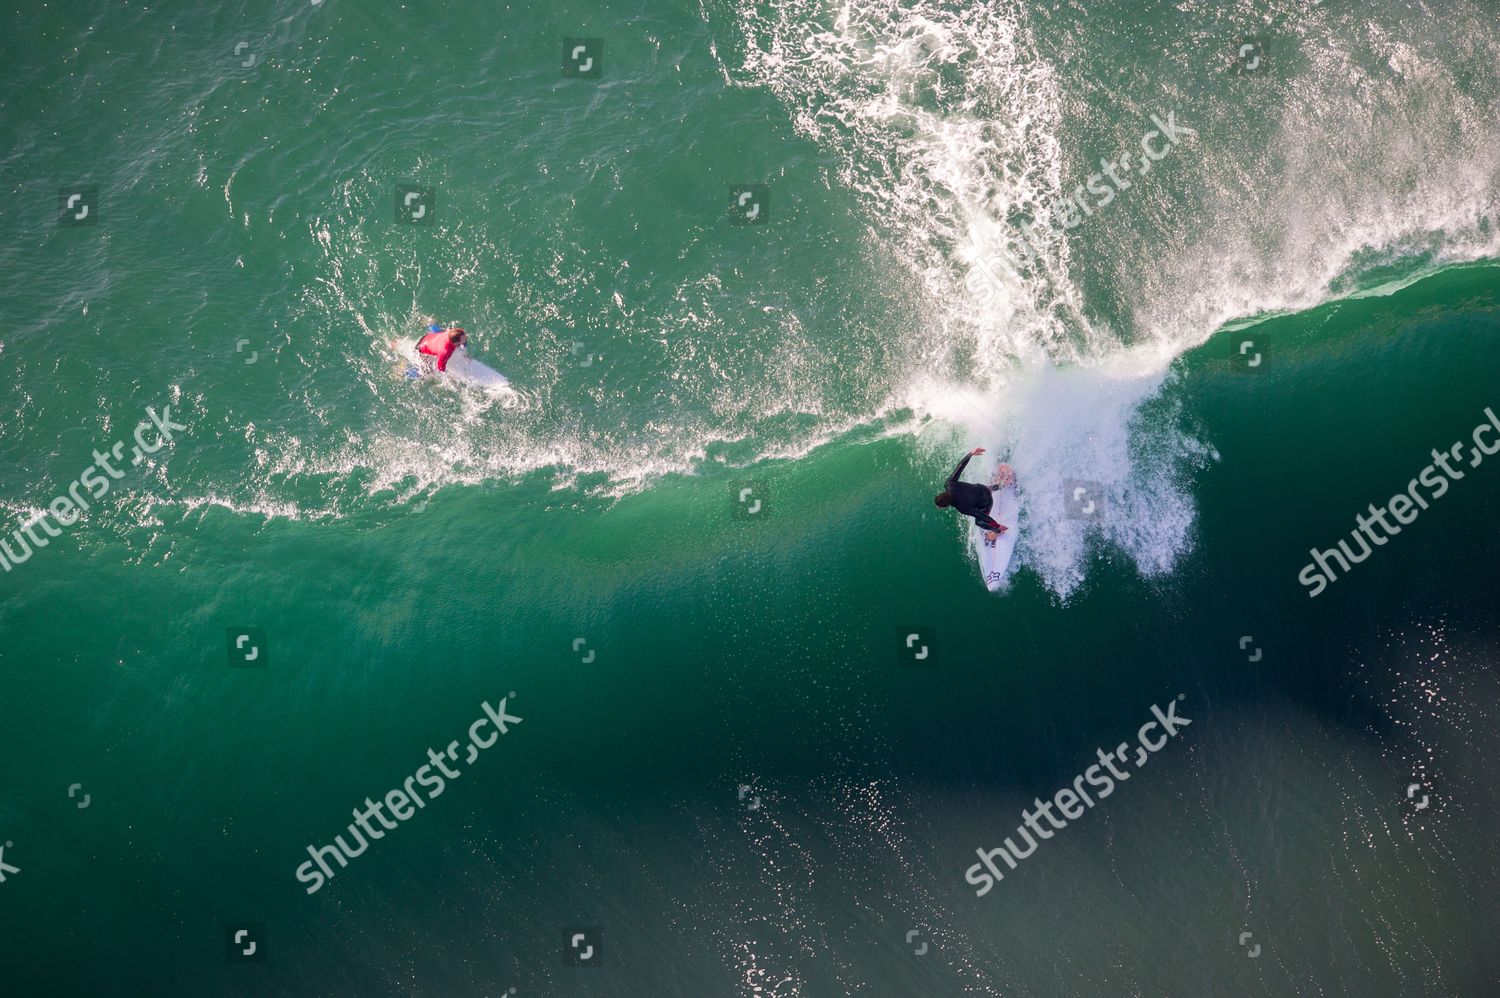 Hawaiian Surfer Bruce Irons Drops Into Wave Editorial Stock Photo Stock Image Shutterstock